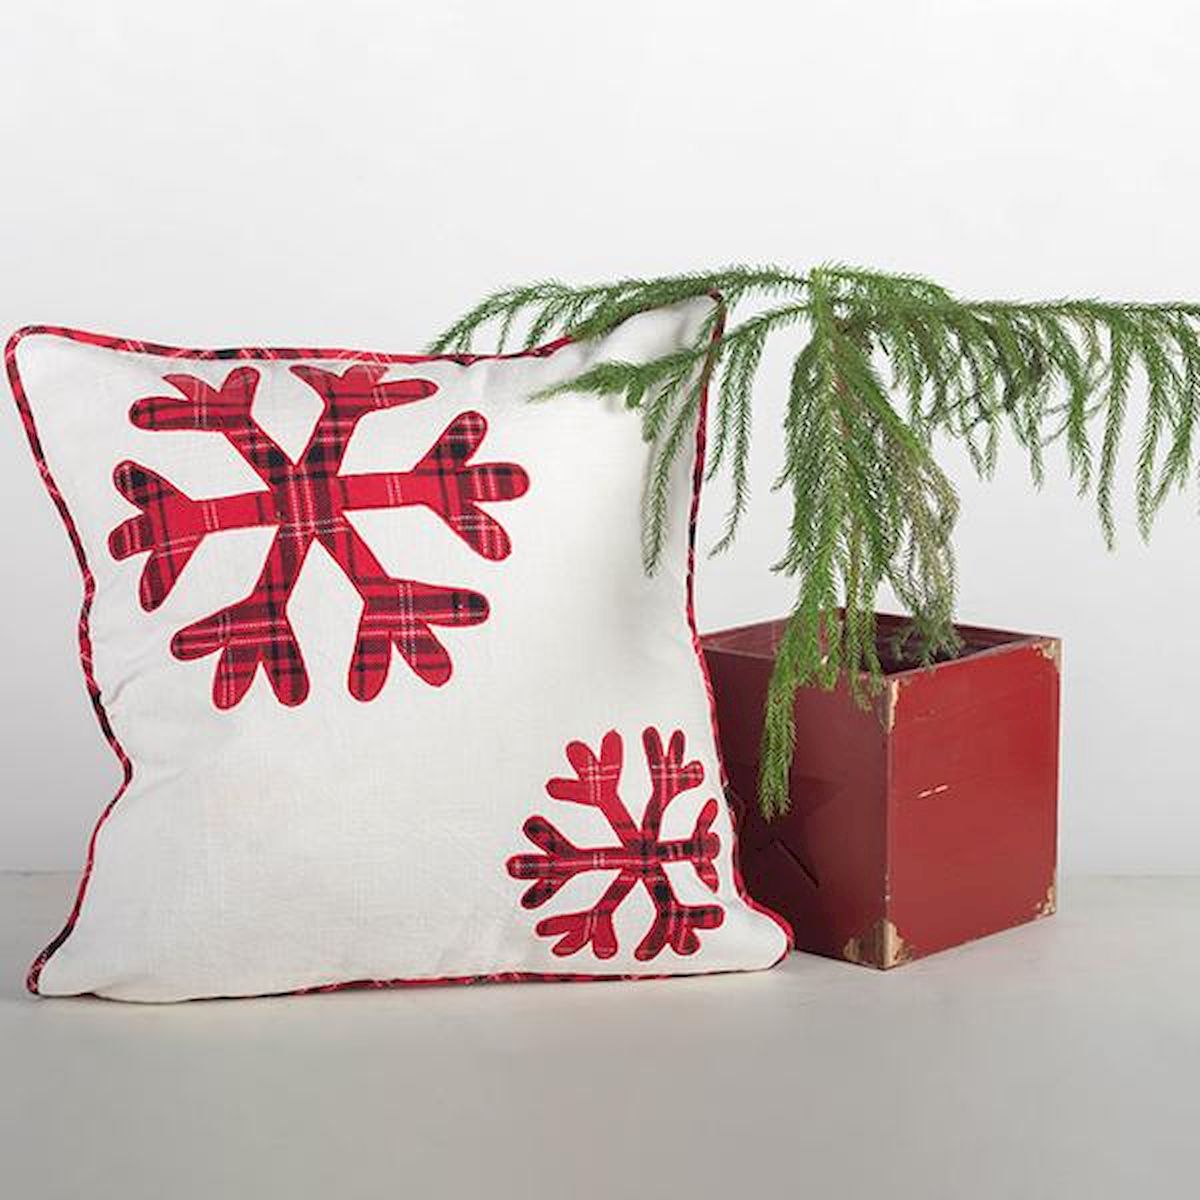 FP-IMT-123-C White with Red & Black Plaid Snowflakes Zippered Cushion Cover -  Forpost